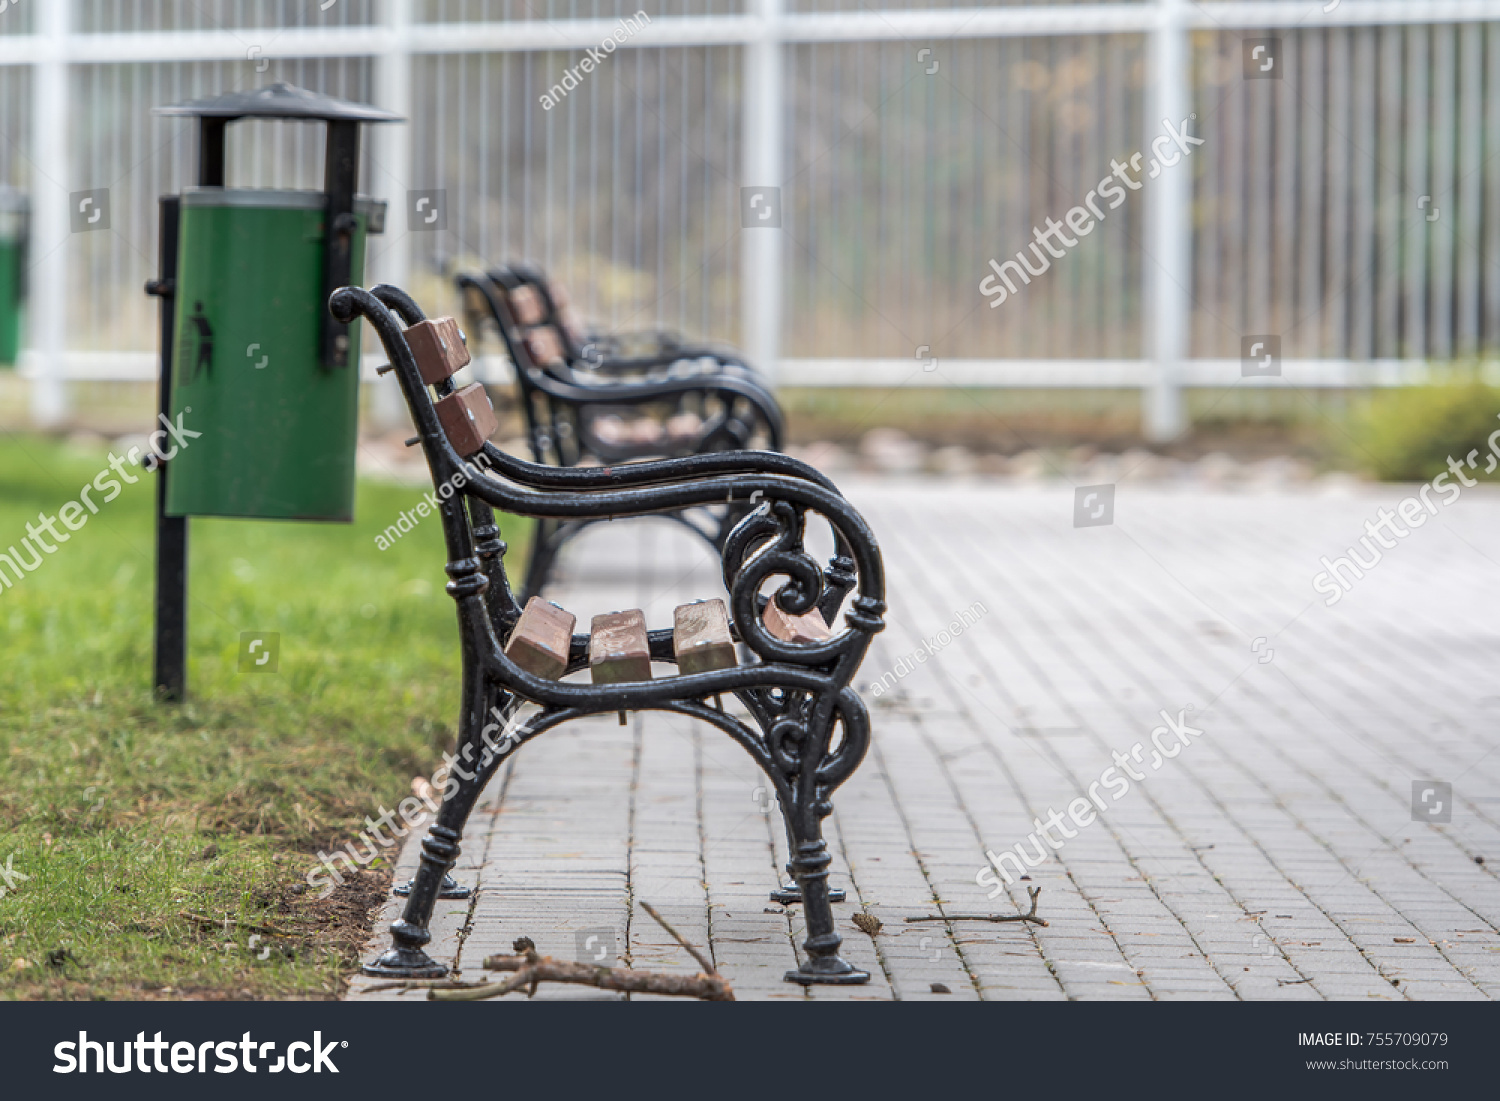 many park benches are on the edge of a rifle. Waste bins are ready for the residual waste #755709079